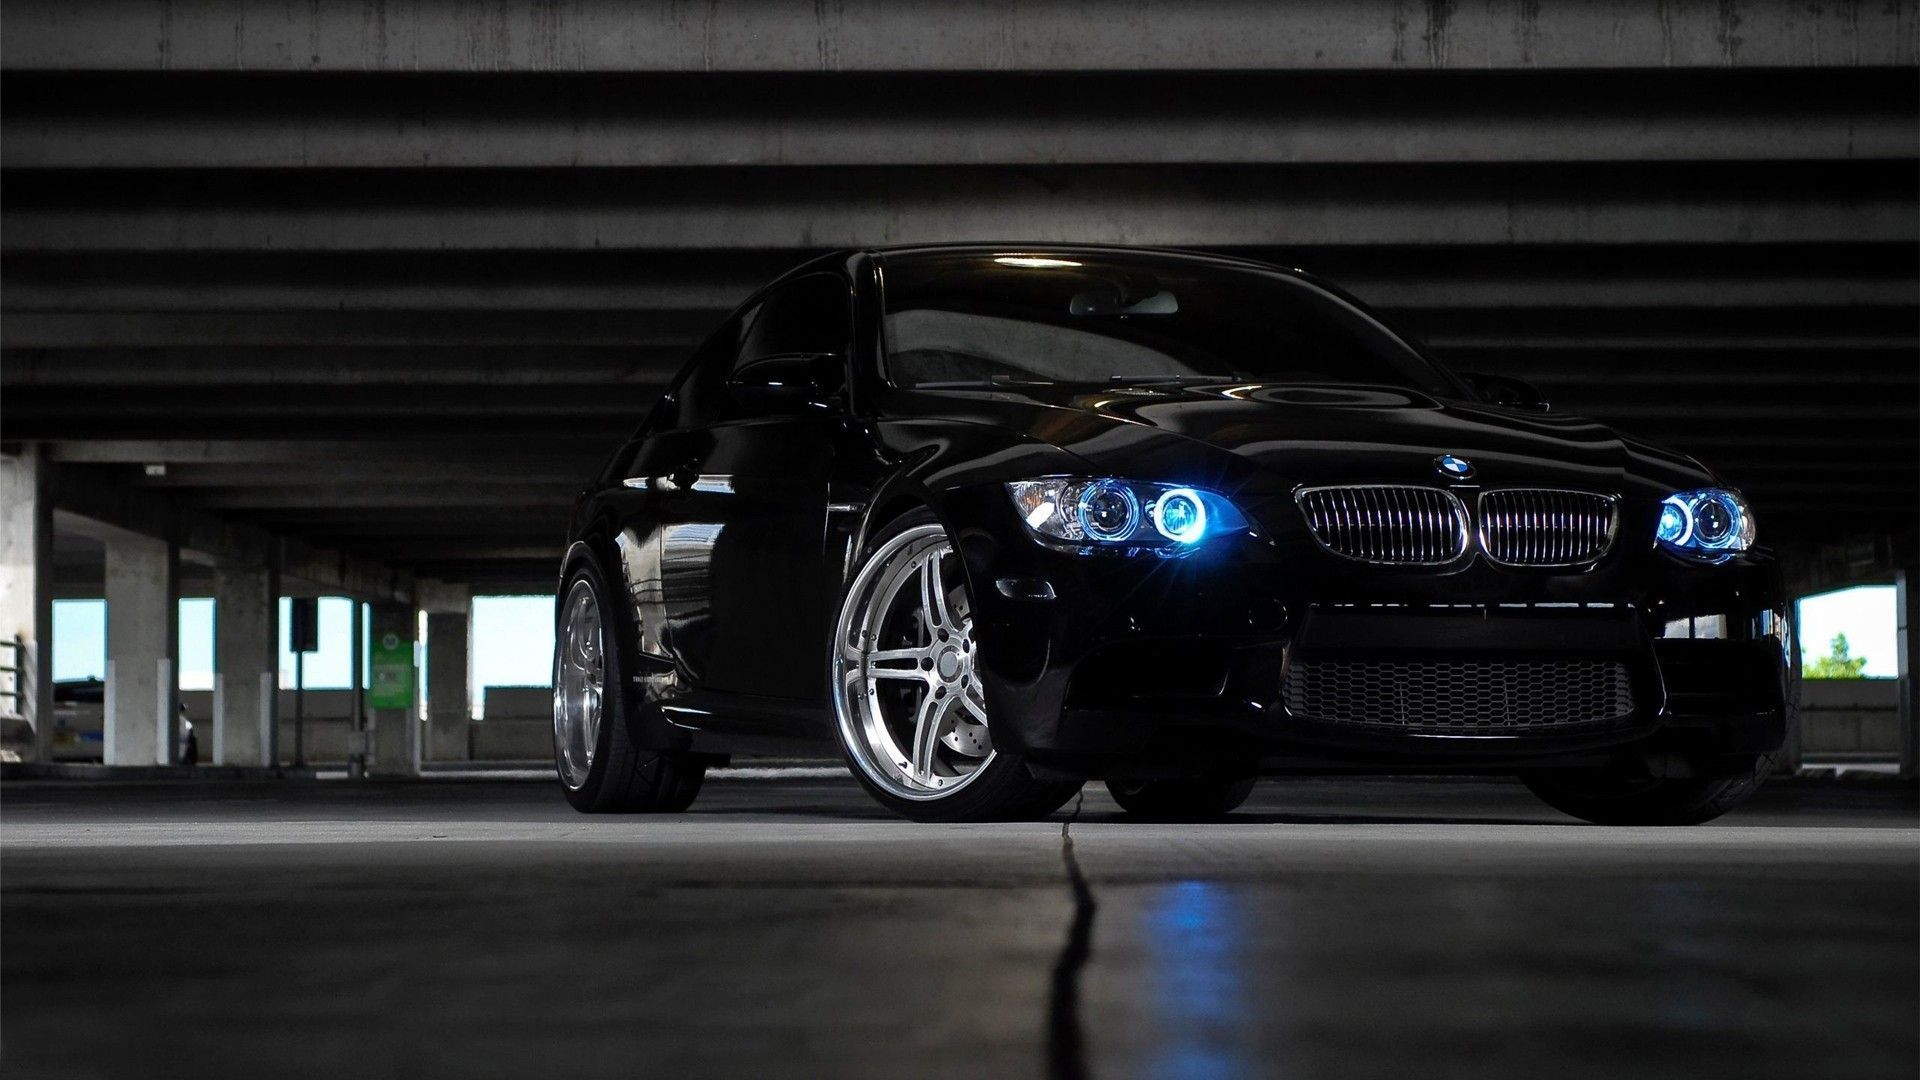 Bmw Wallpaper Tuning | AUTOMOTIVE REVIEW SITES